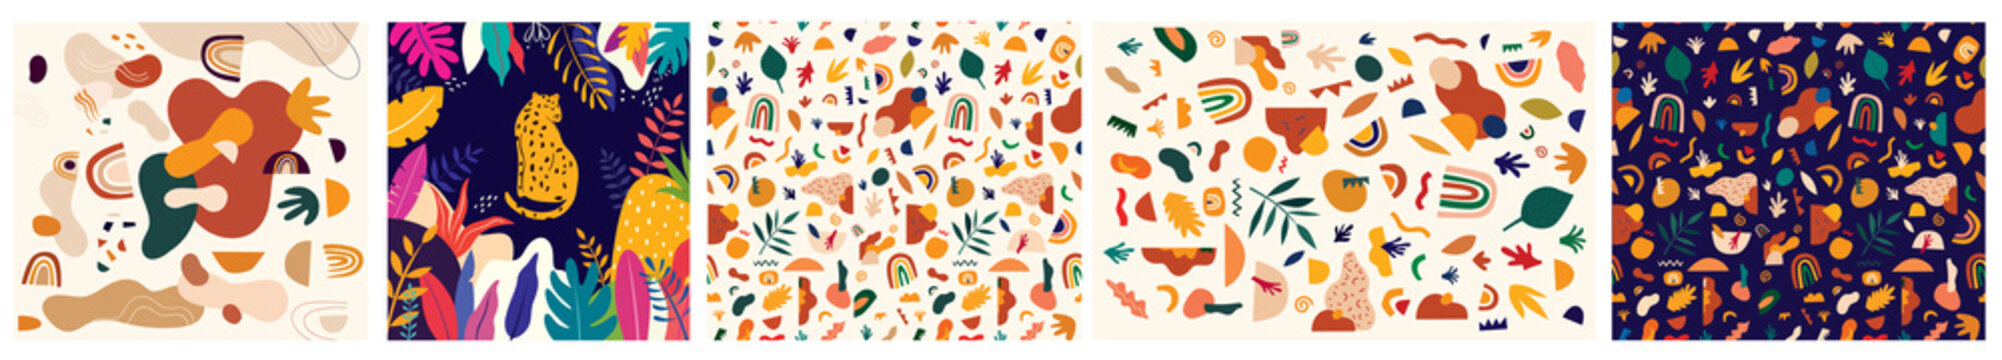 Decorative abstract collection with colorful doodles. Hand-drawn modern illustration